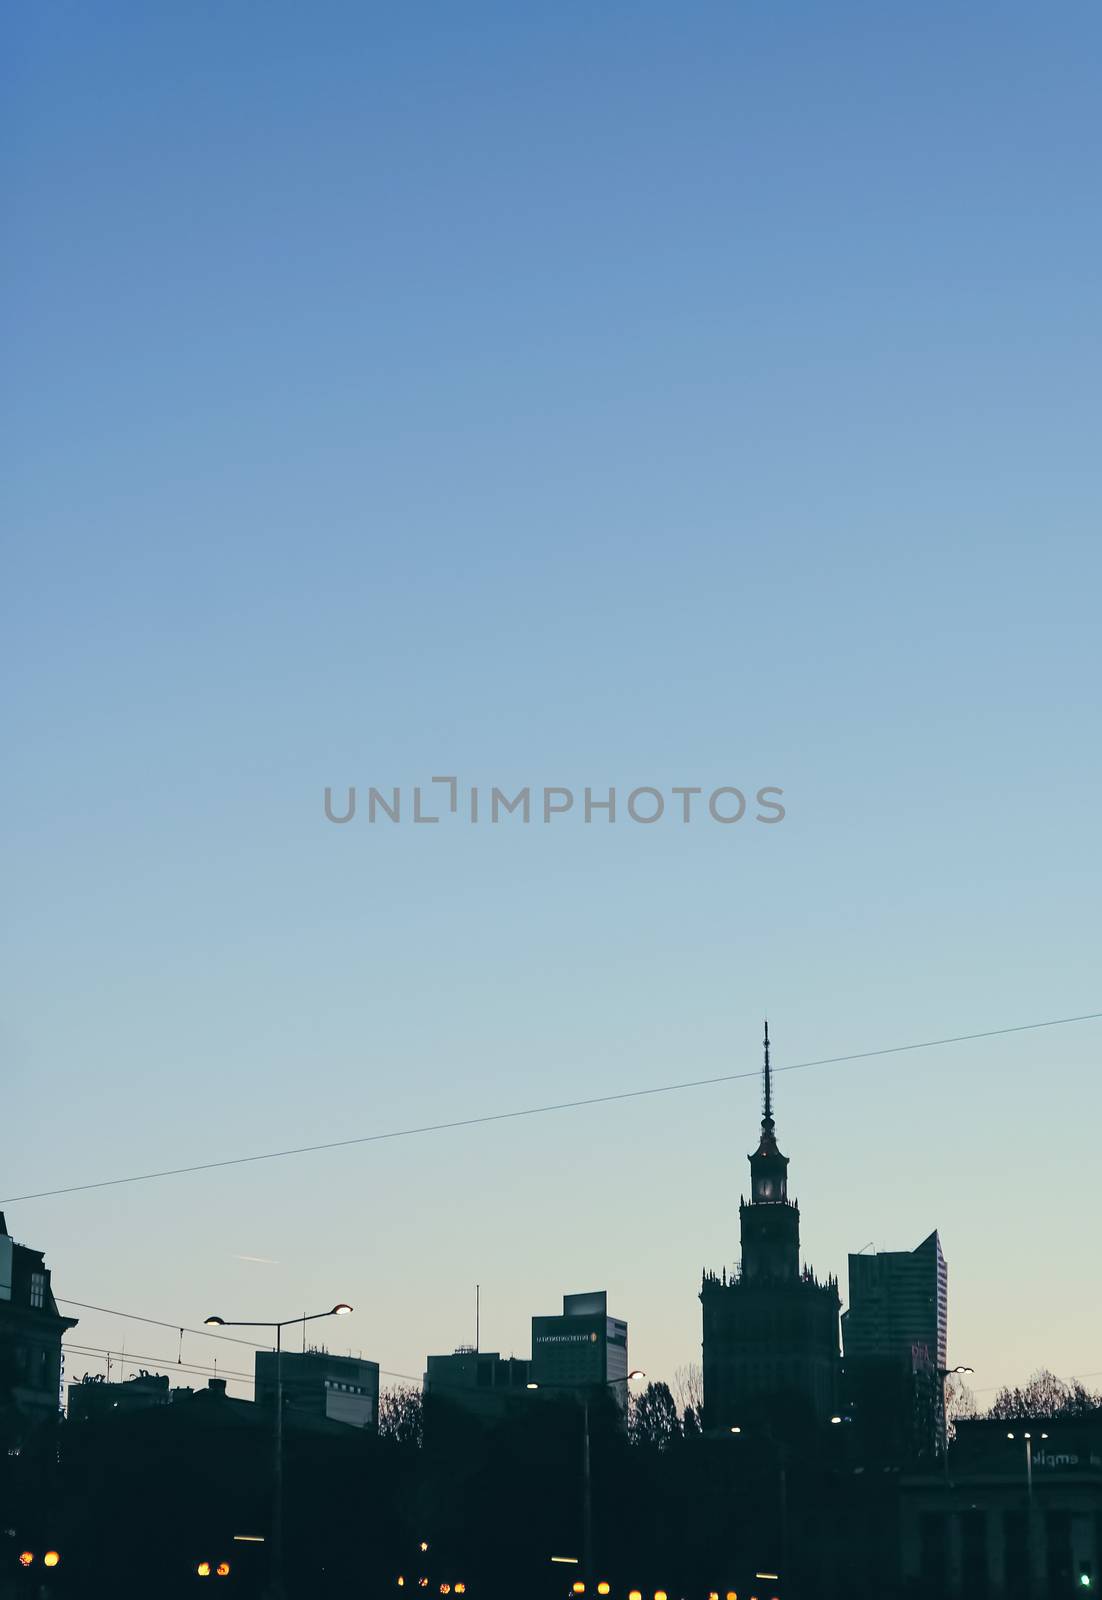 Cityscape silhouette of a European city as background, evening view of Warsaw, Poland